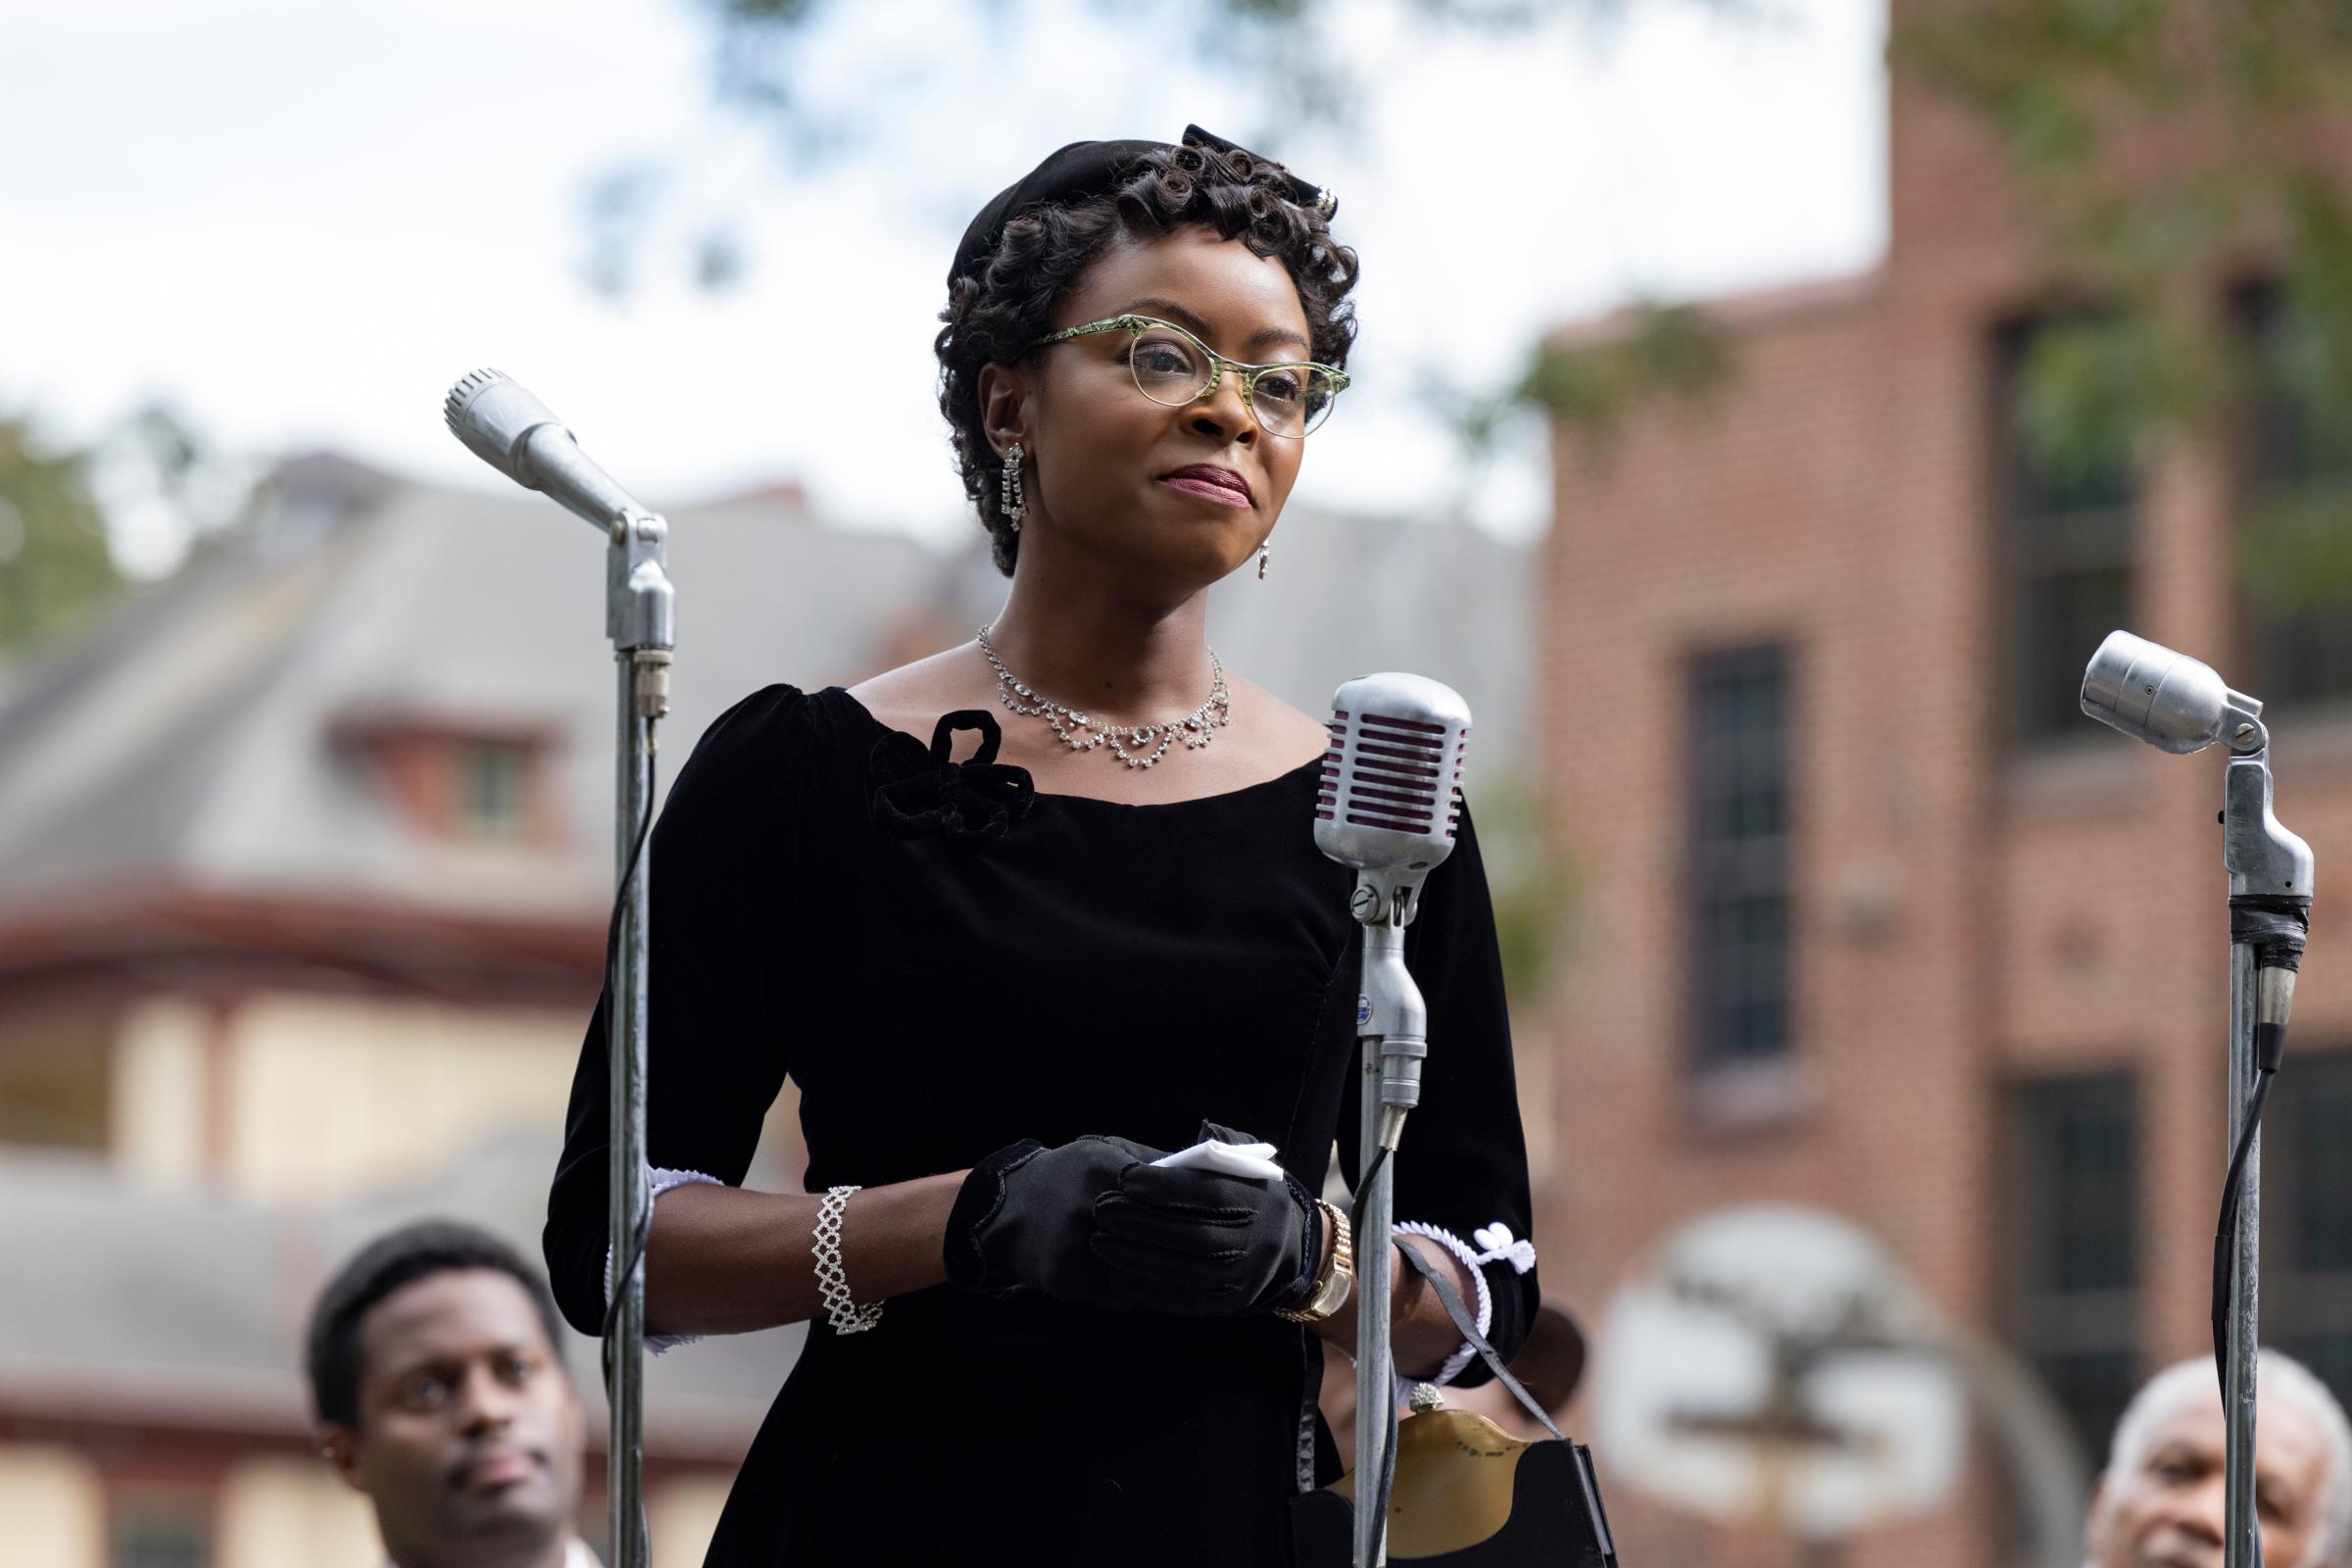 Danielle Deadwyler as Mamie Till Mobley in TILL, directed by Chinonye Chukwu, dressed in a black dress and glasses, speaking into a microphone.